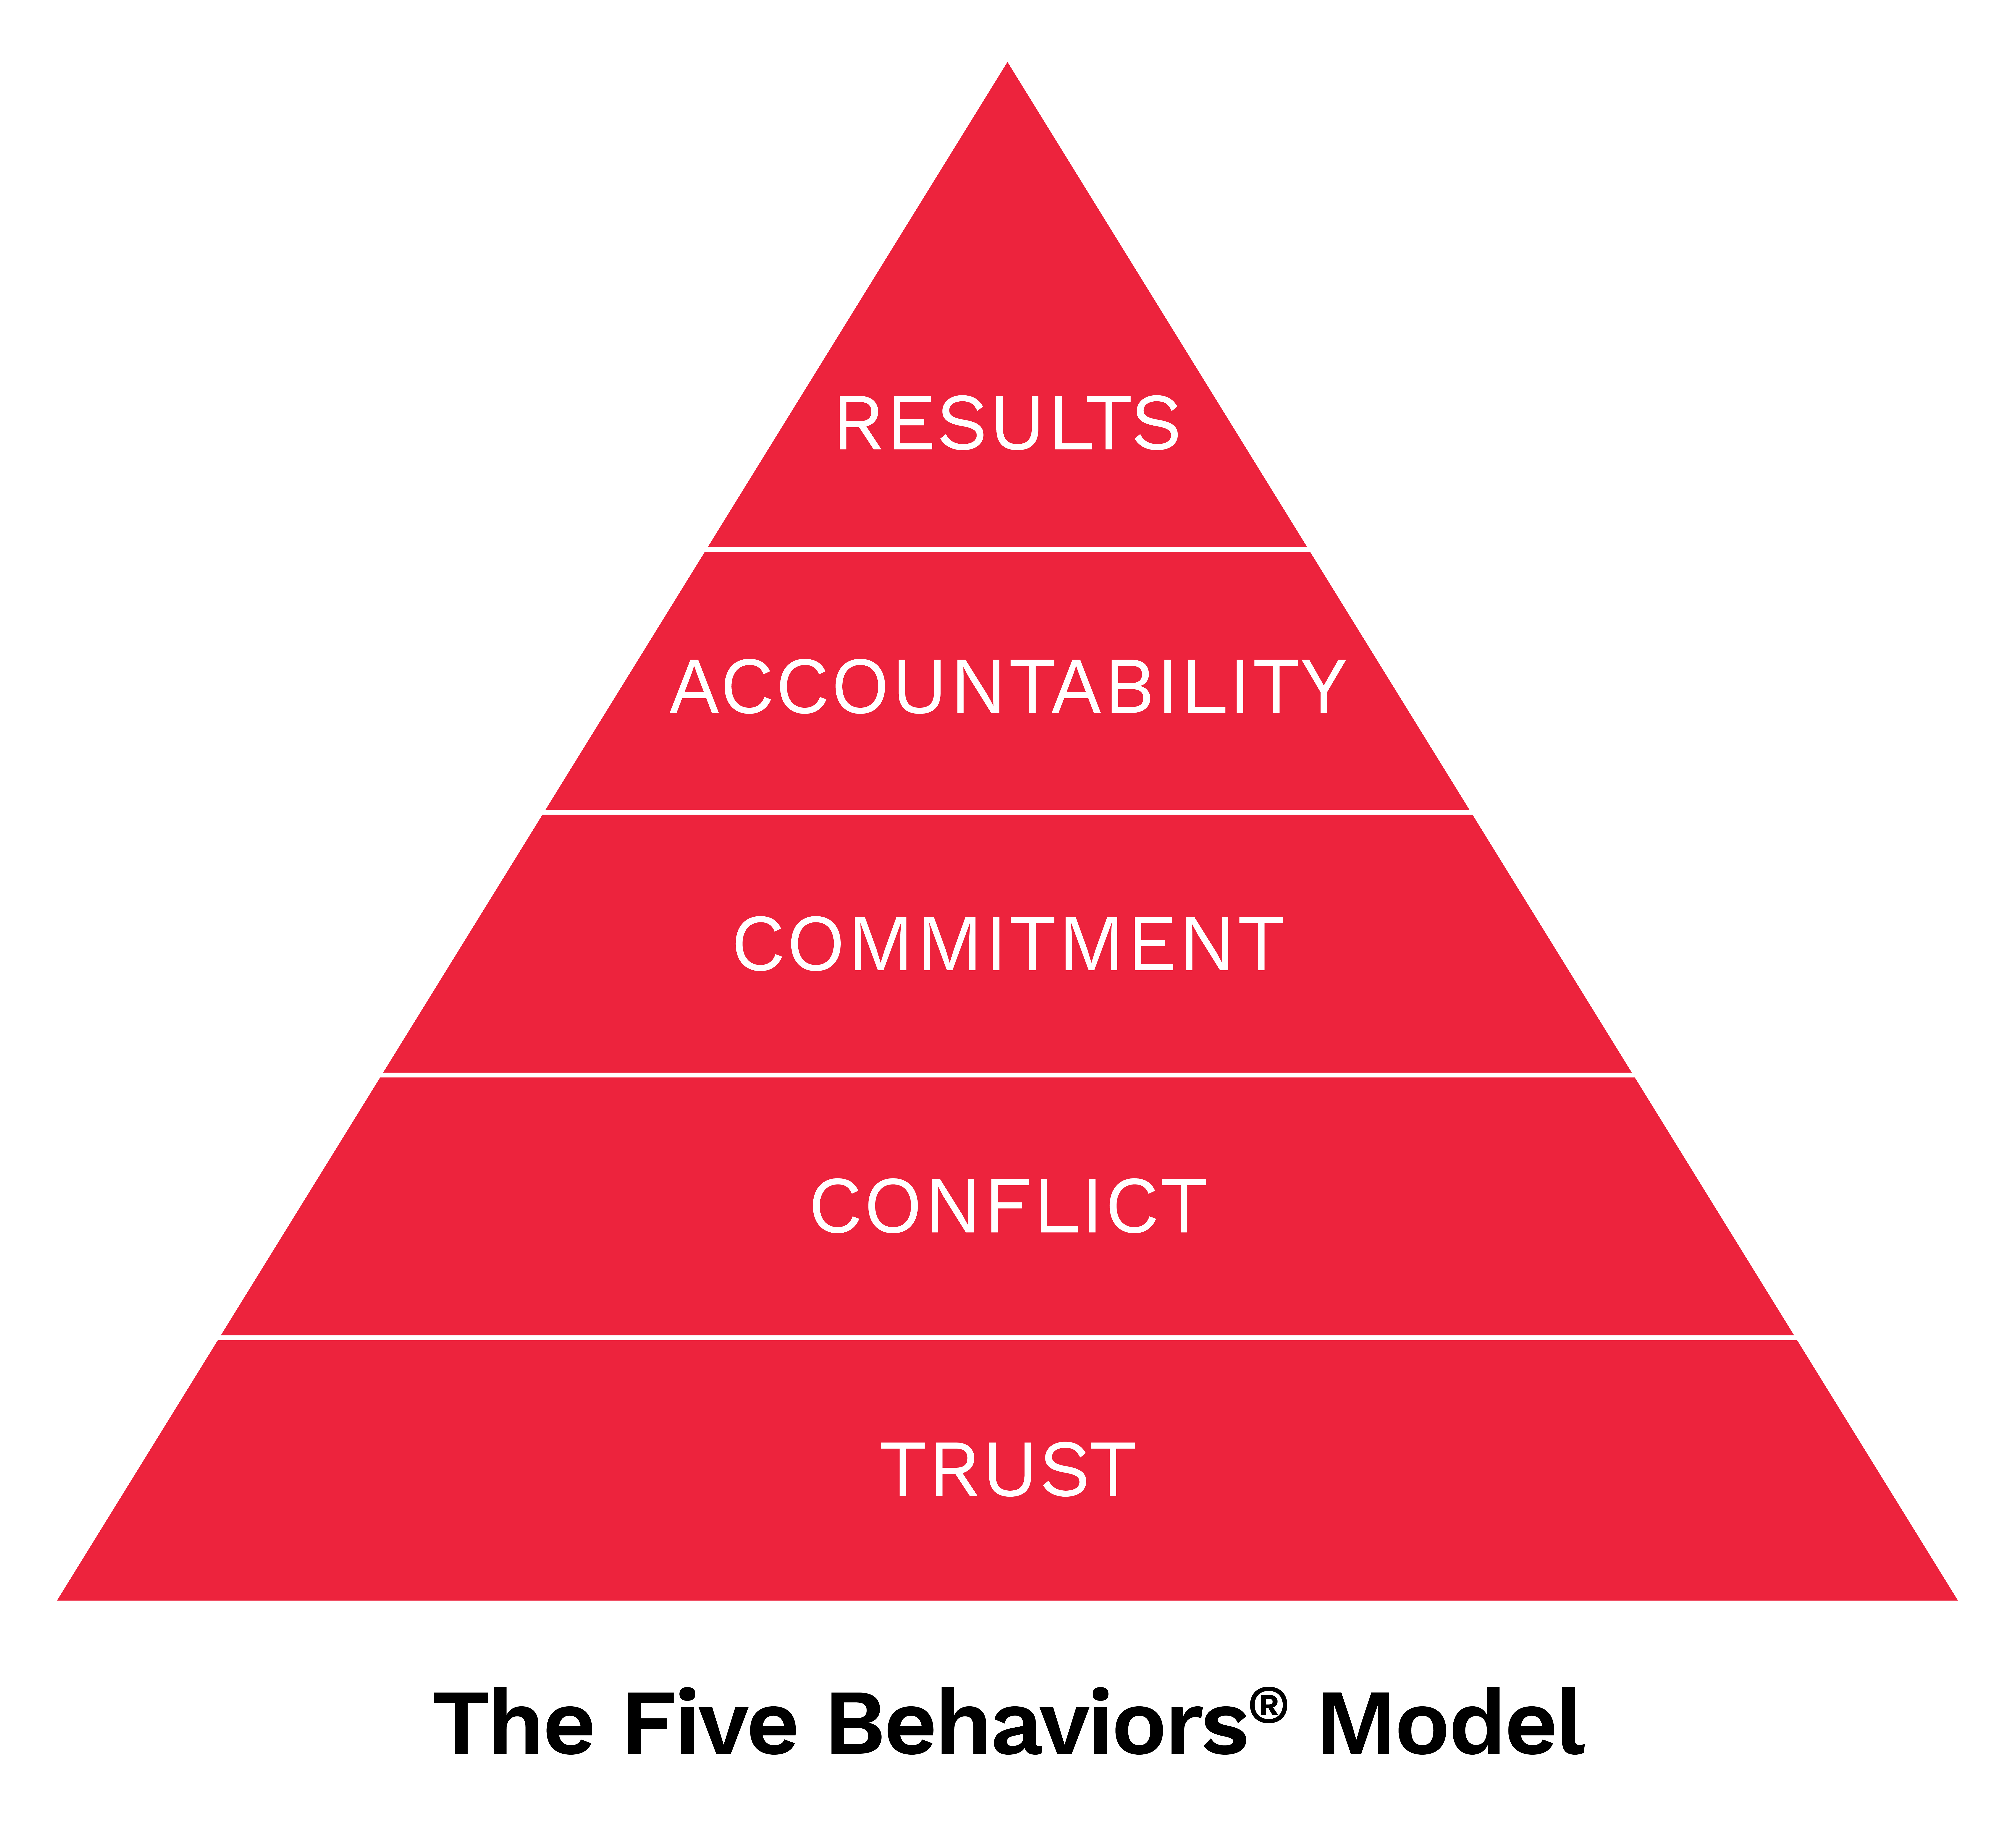 The Five Behaviors model: a pyramid with, from bottom to top: trust, conflict, commitment, accountability, results